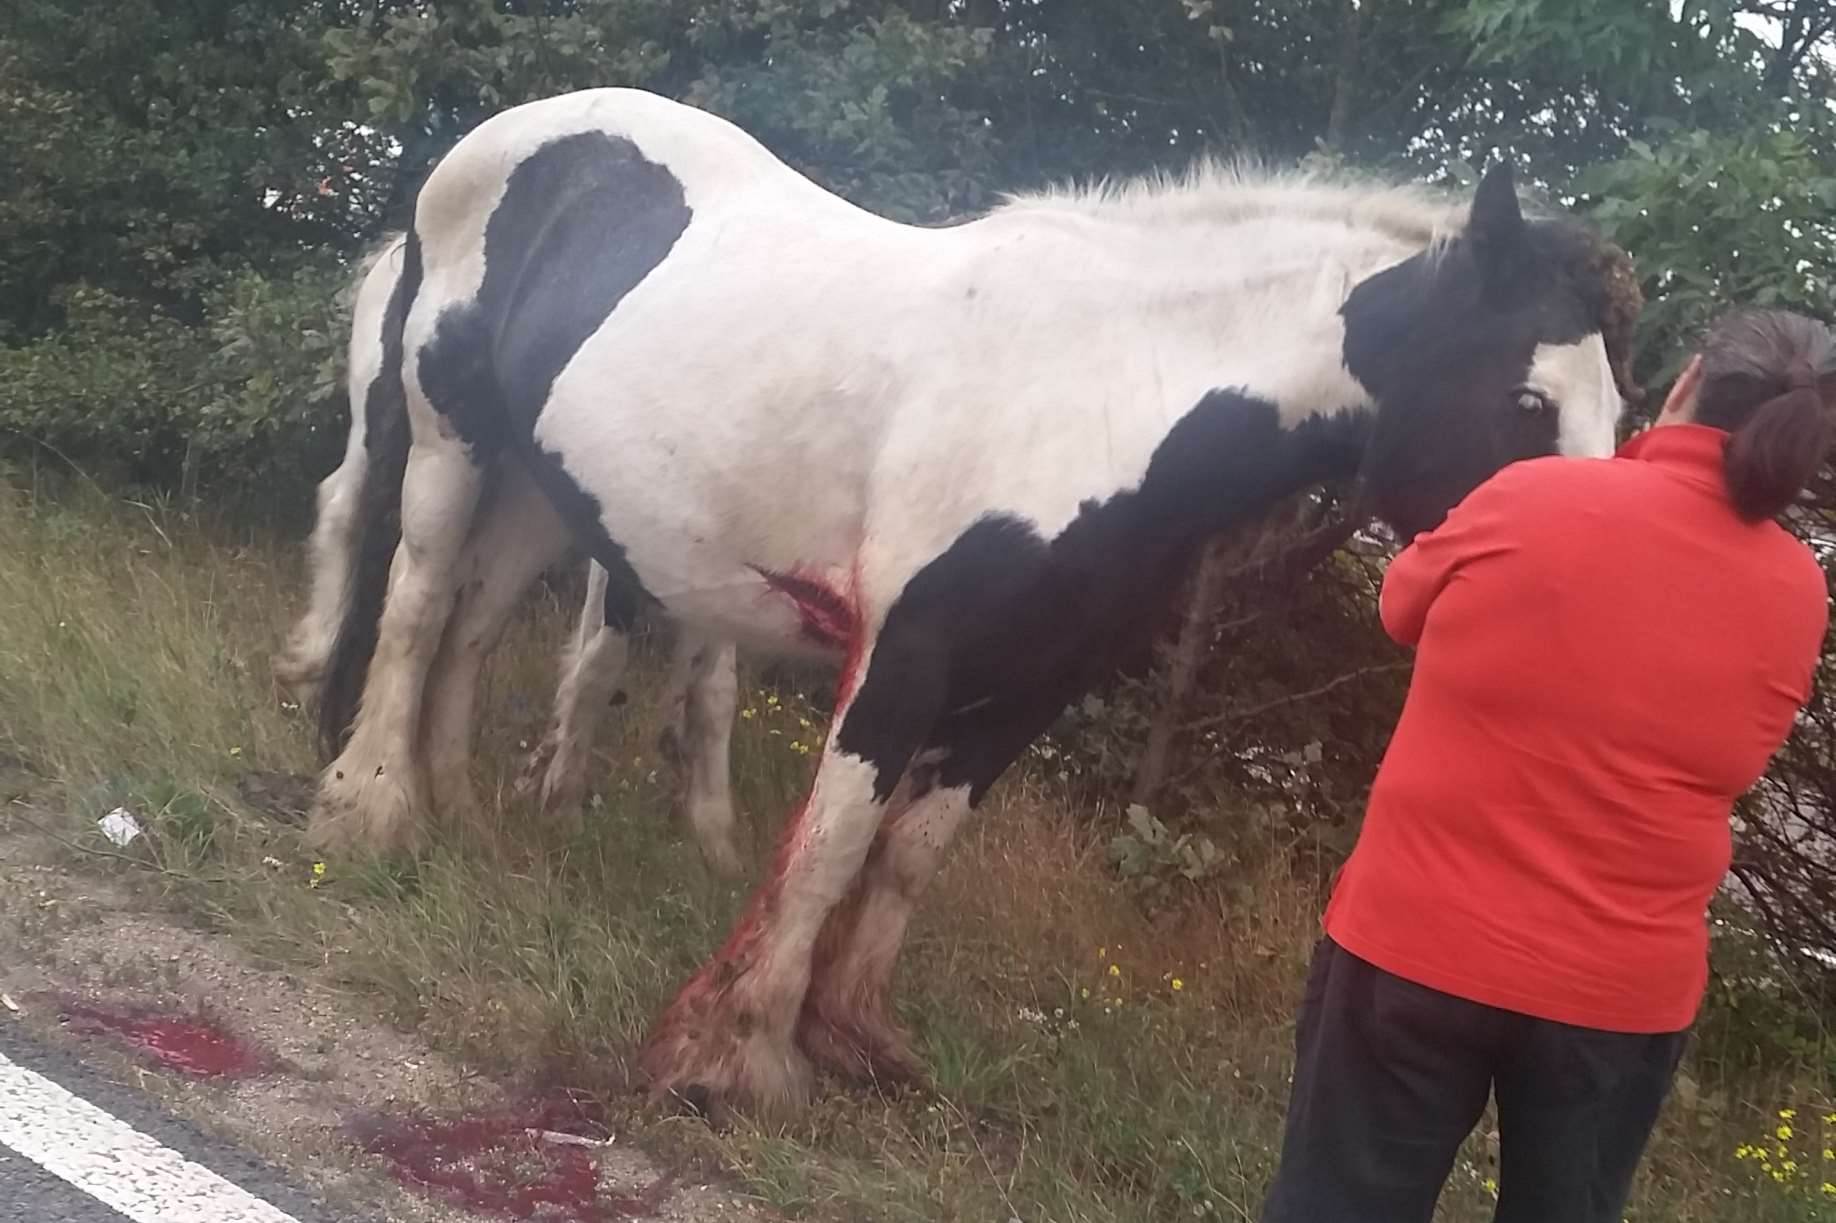 The horse was taken away but only suffered from cuts